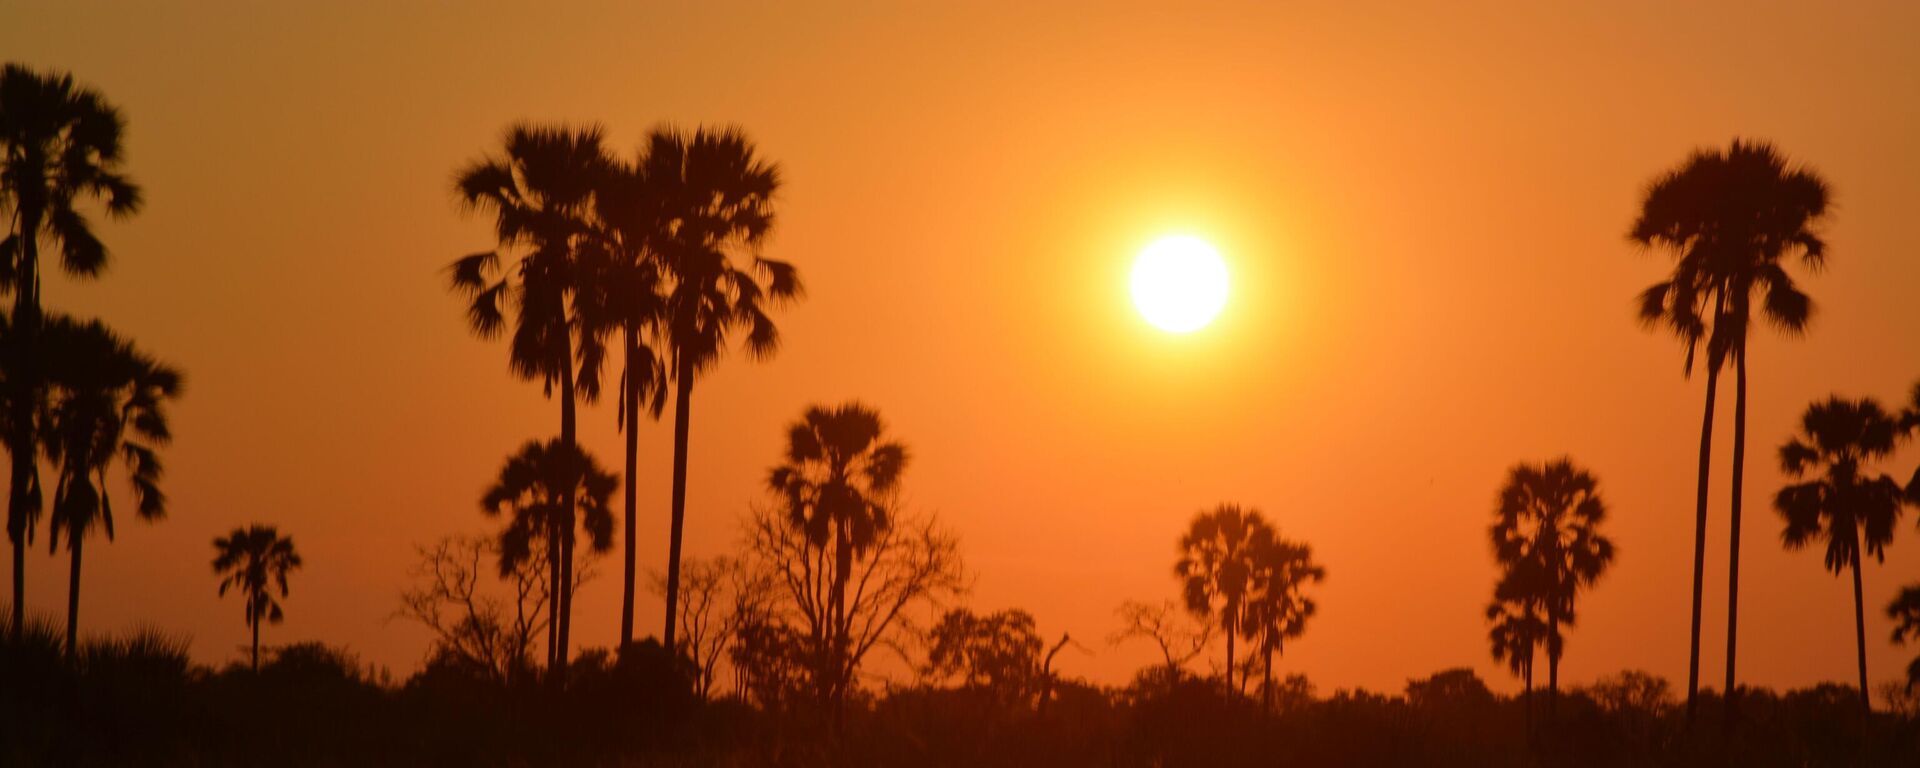 This March 1, 2013 photo shows a sunset in Botswana's Okavango Delta. Trees silhouetted against a bright orange sky lit by a searing white disc is a typical sight for sunsets  in the region, a popular destination for animal-watching safaris. - Sputnik International, 1920, 16.03.2023